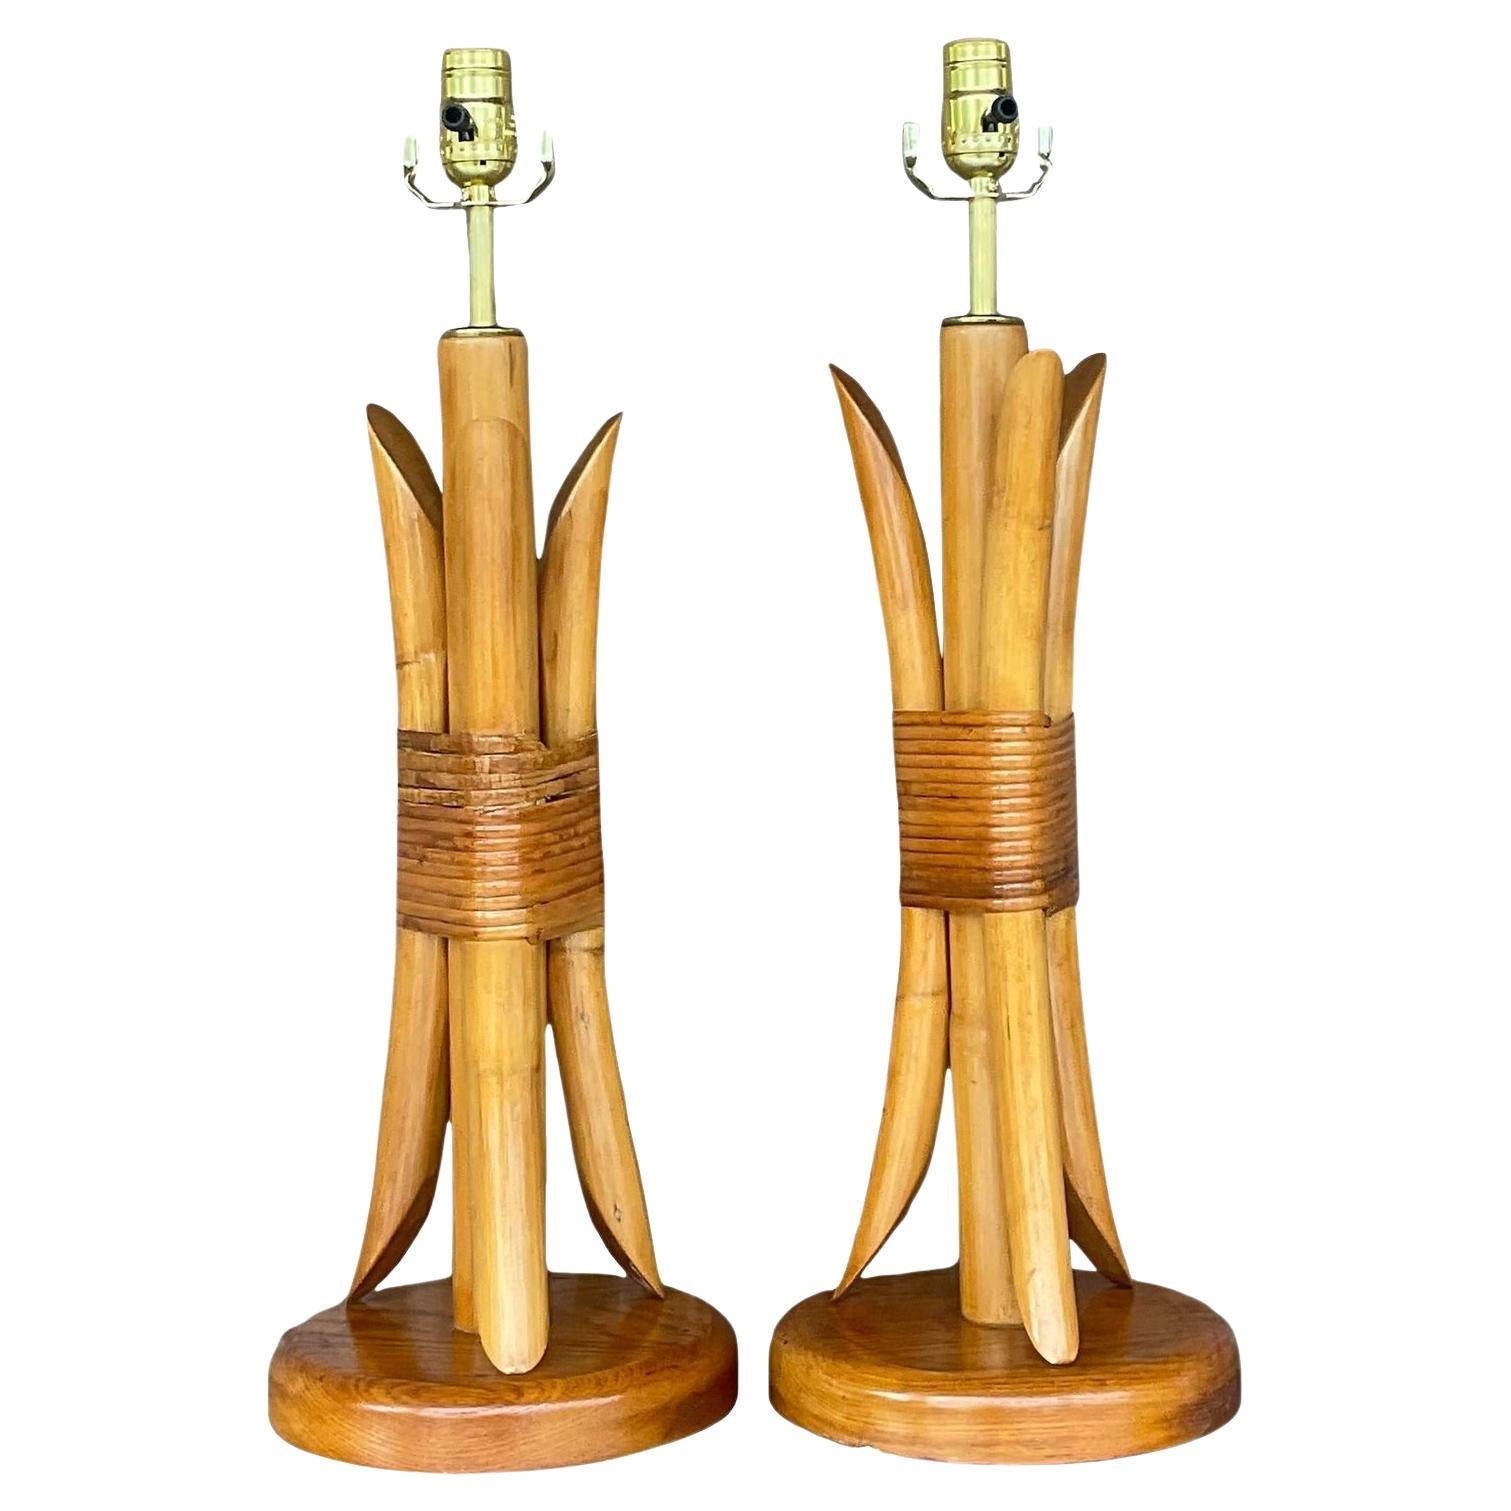 Vintage Coastal Wrapped Rattan Table Lamps - a Pair For Sale